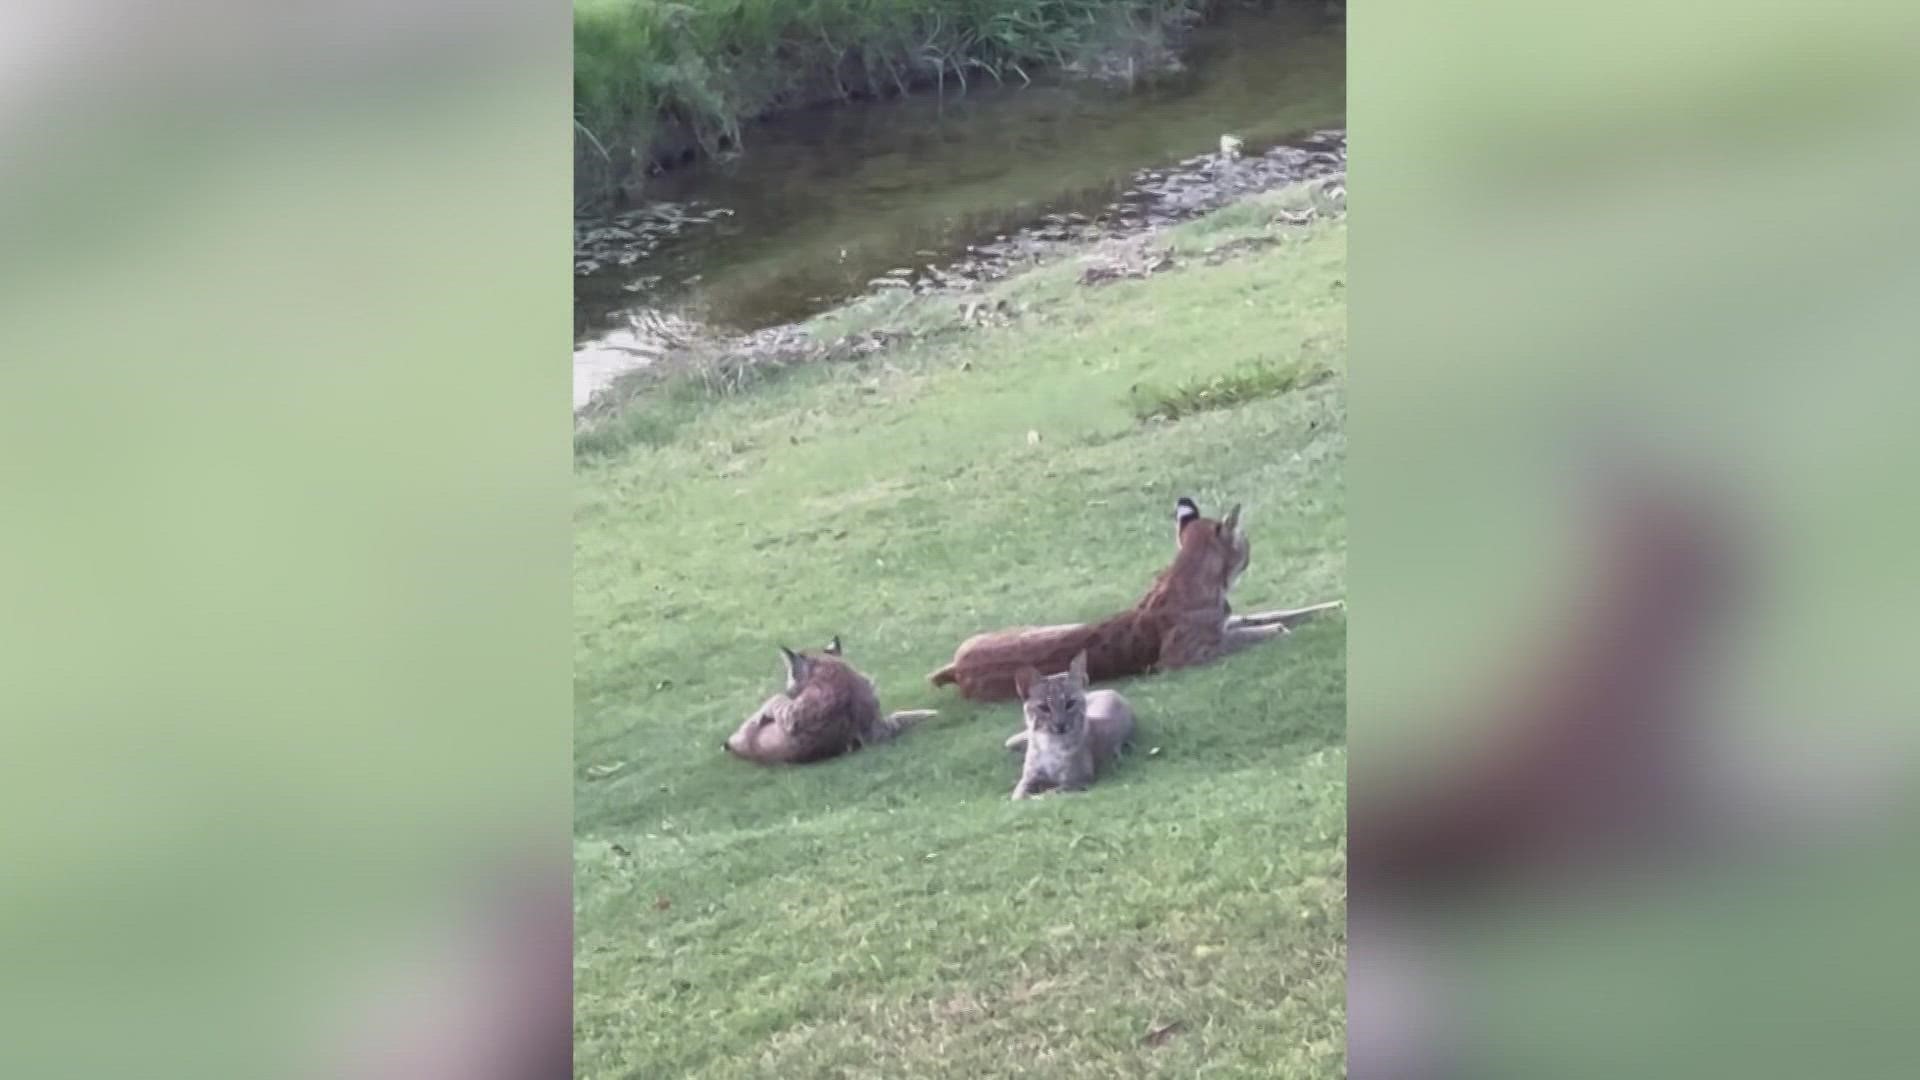 Brian Hughes took video of the bobcats from his backyard that sits along the course at Gleneagles. He's seen wildlife there before but nothing like this.